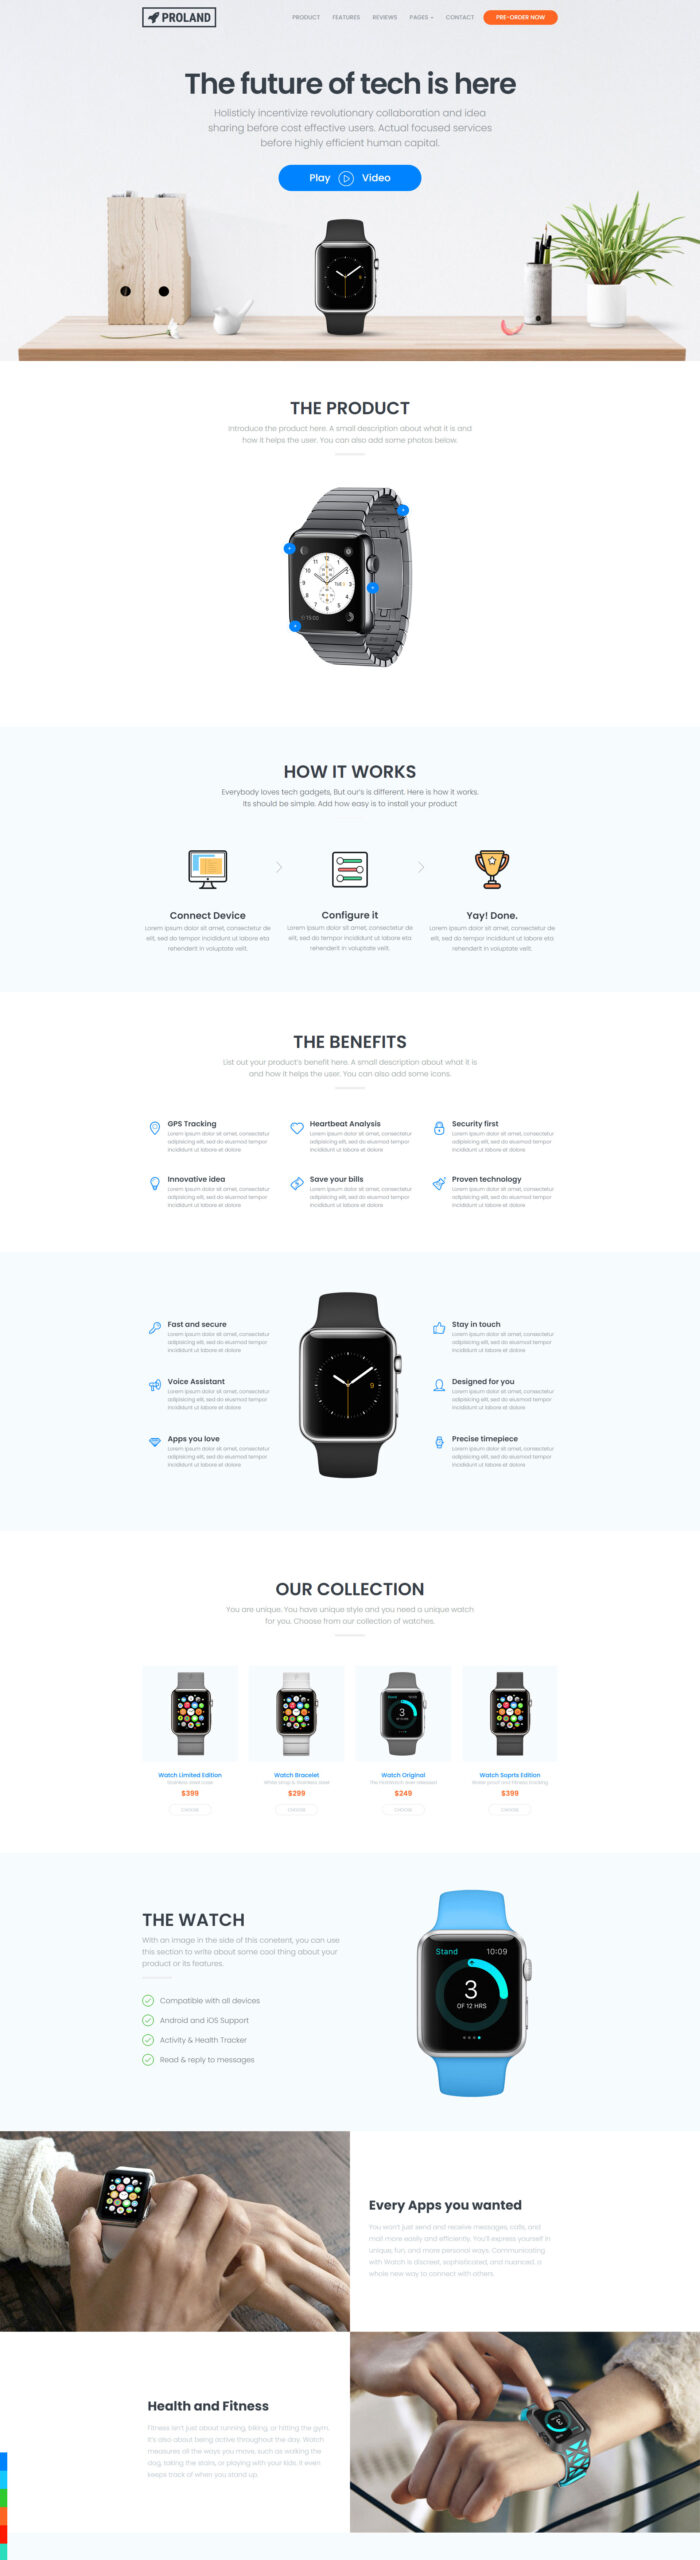 Product-Landing-Page-Template---Proland